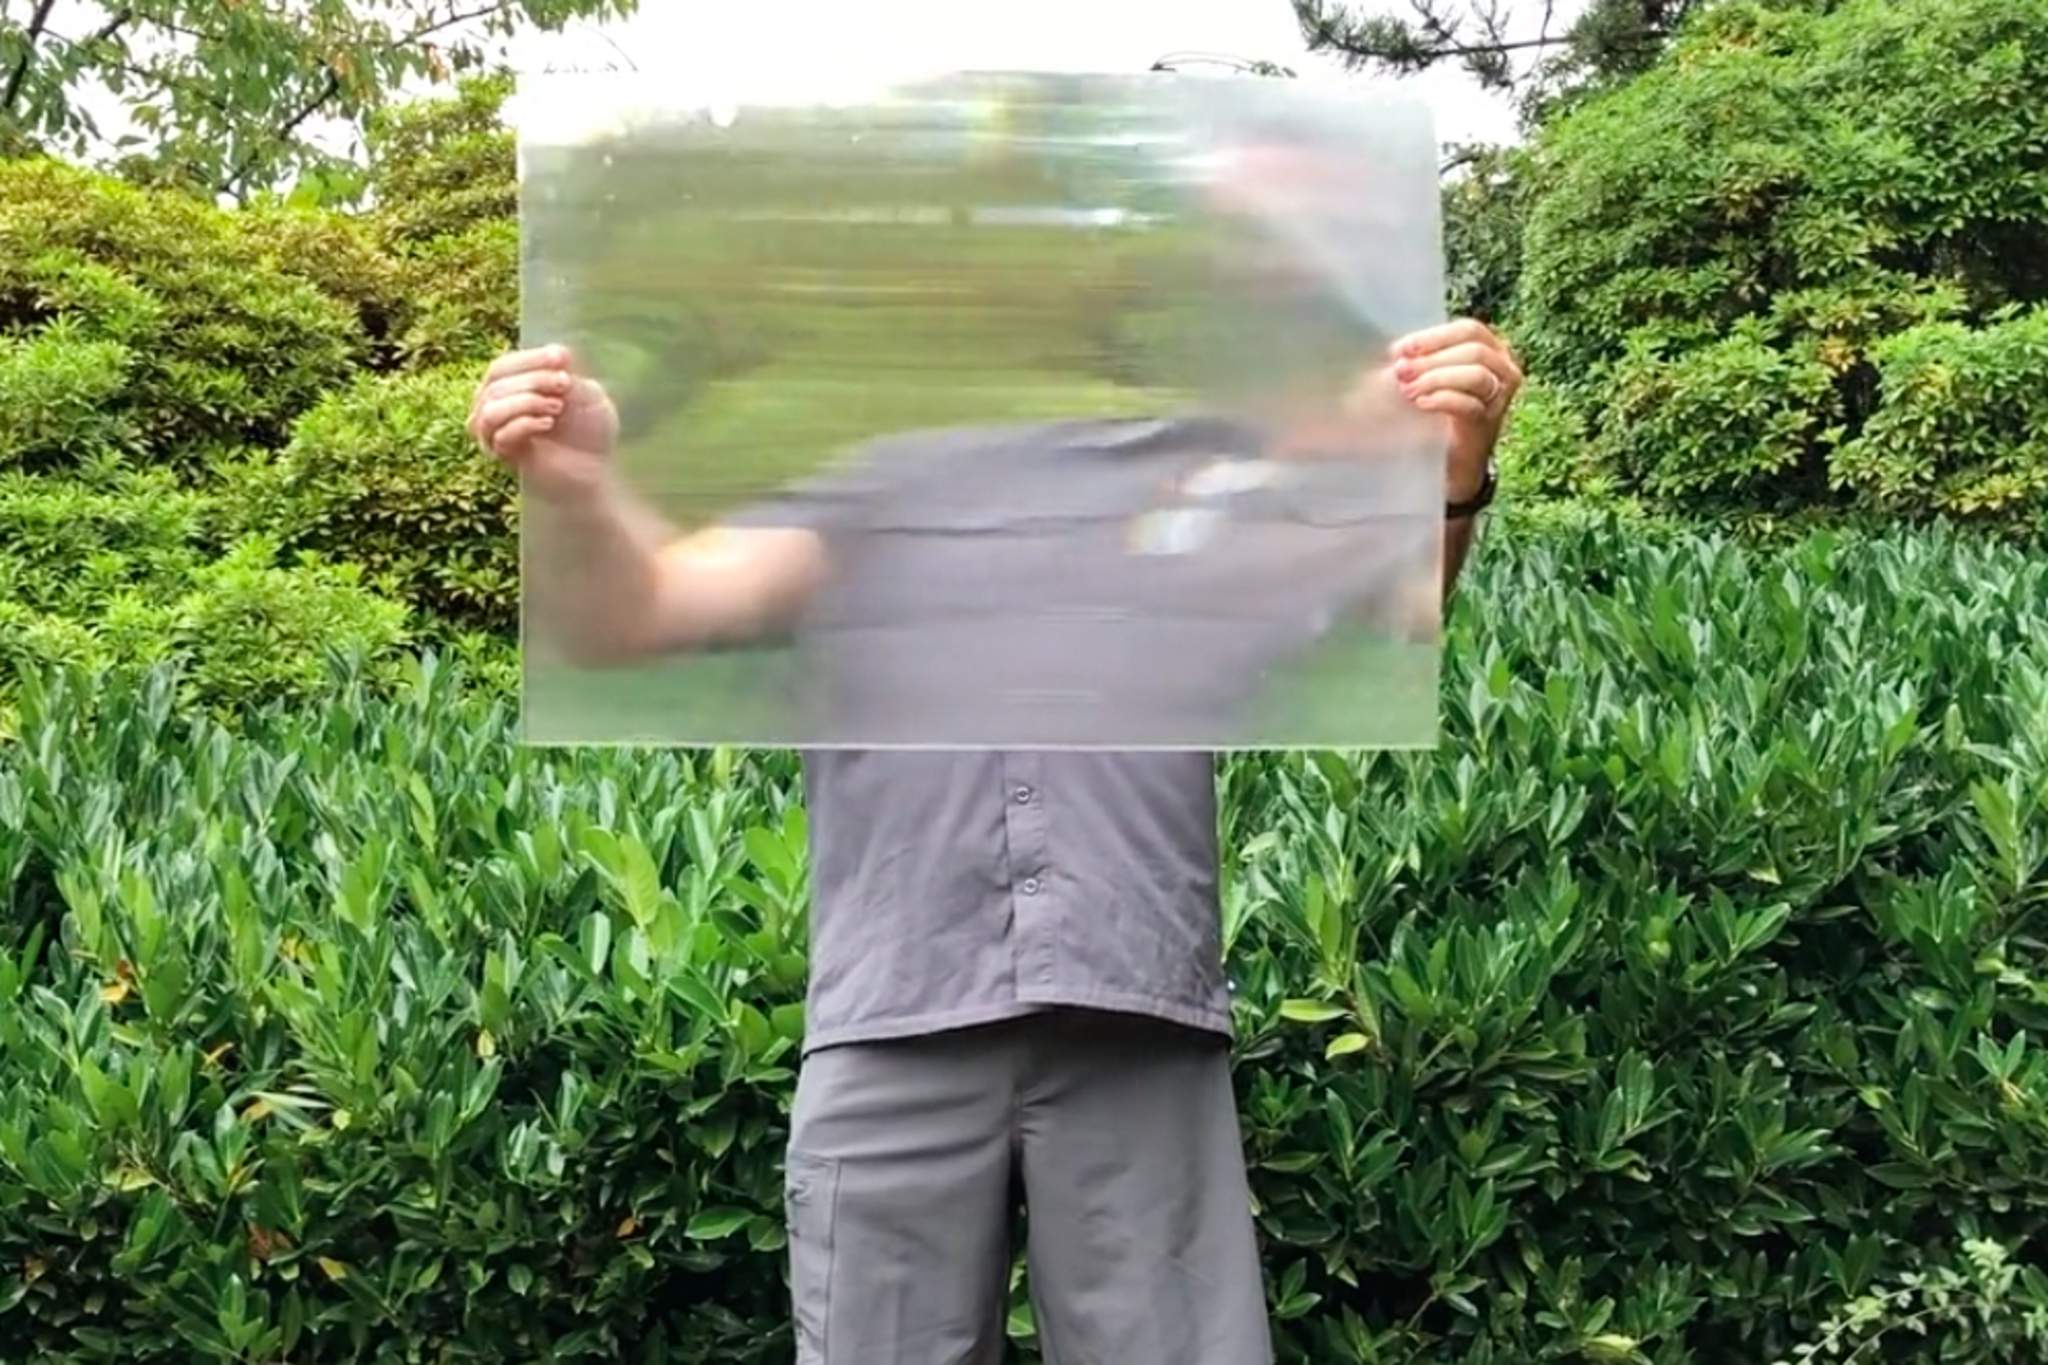 Canadian biotech company shows off real life invisibility cloak